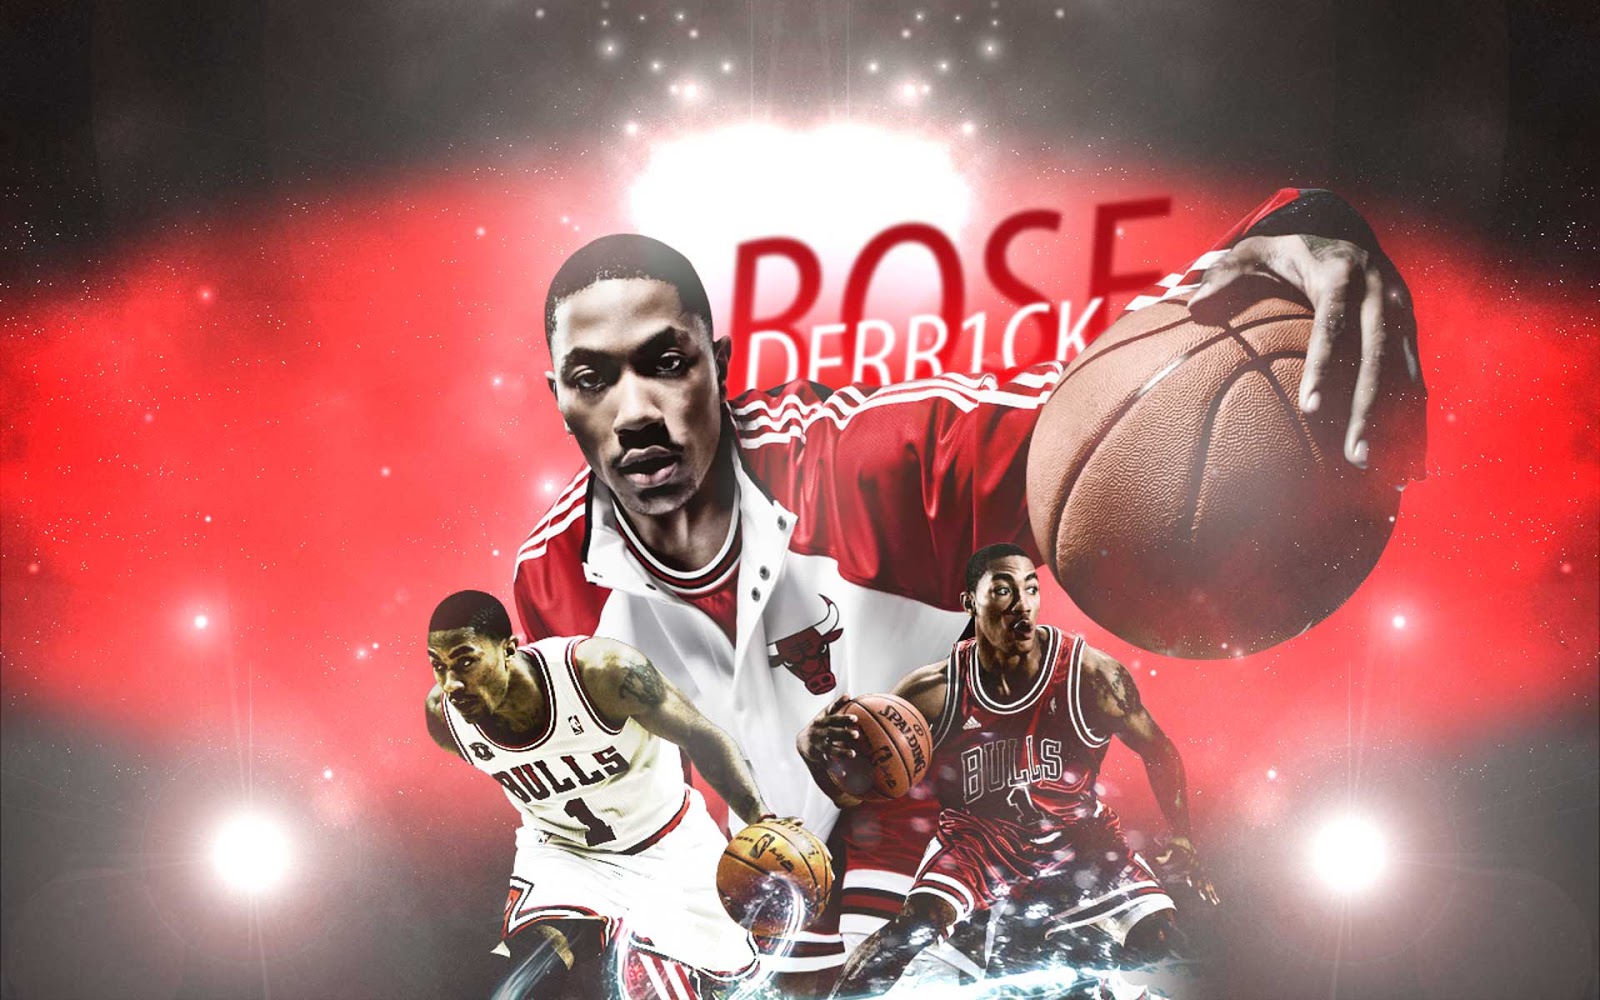 Chicago Bulls Basketball Club Players HD Wallpapers 2013 - Its All About Basketball1600 x 1000